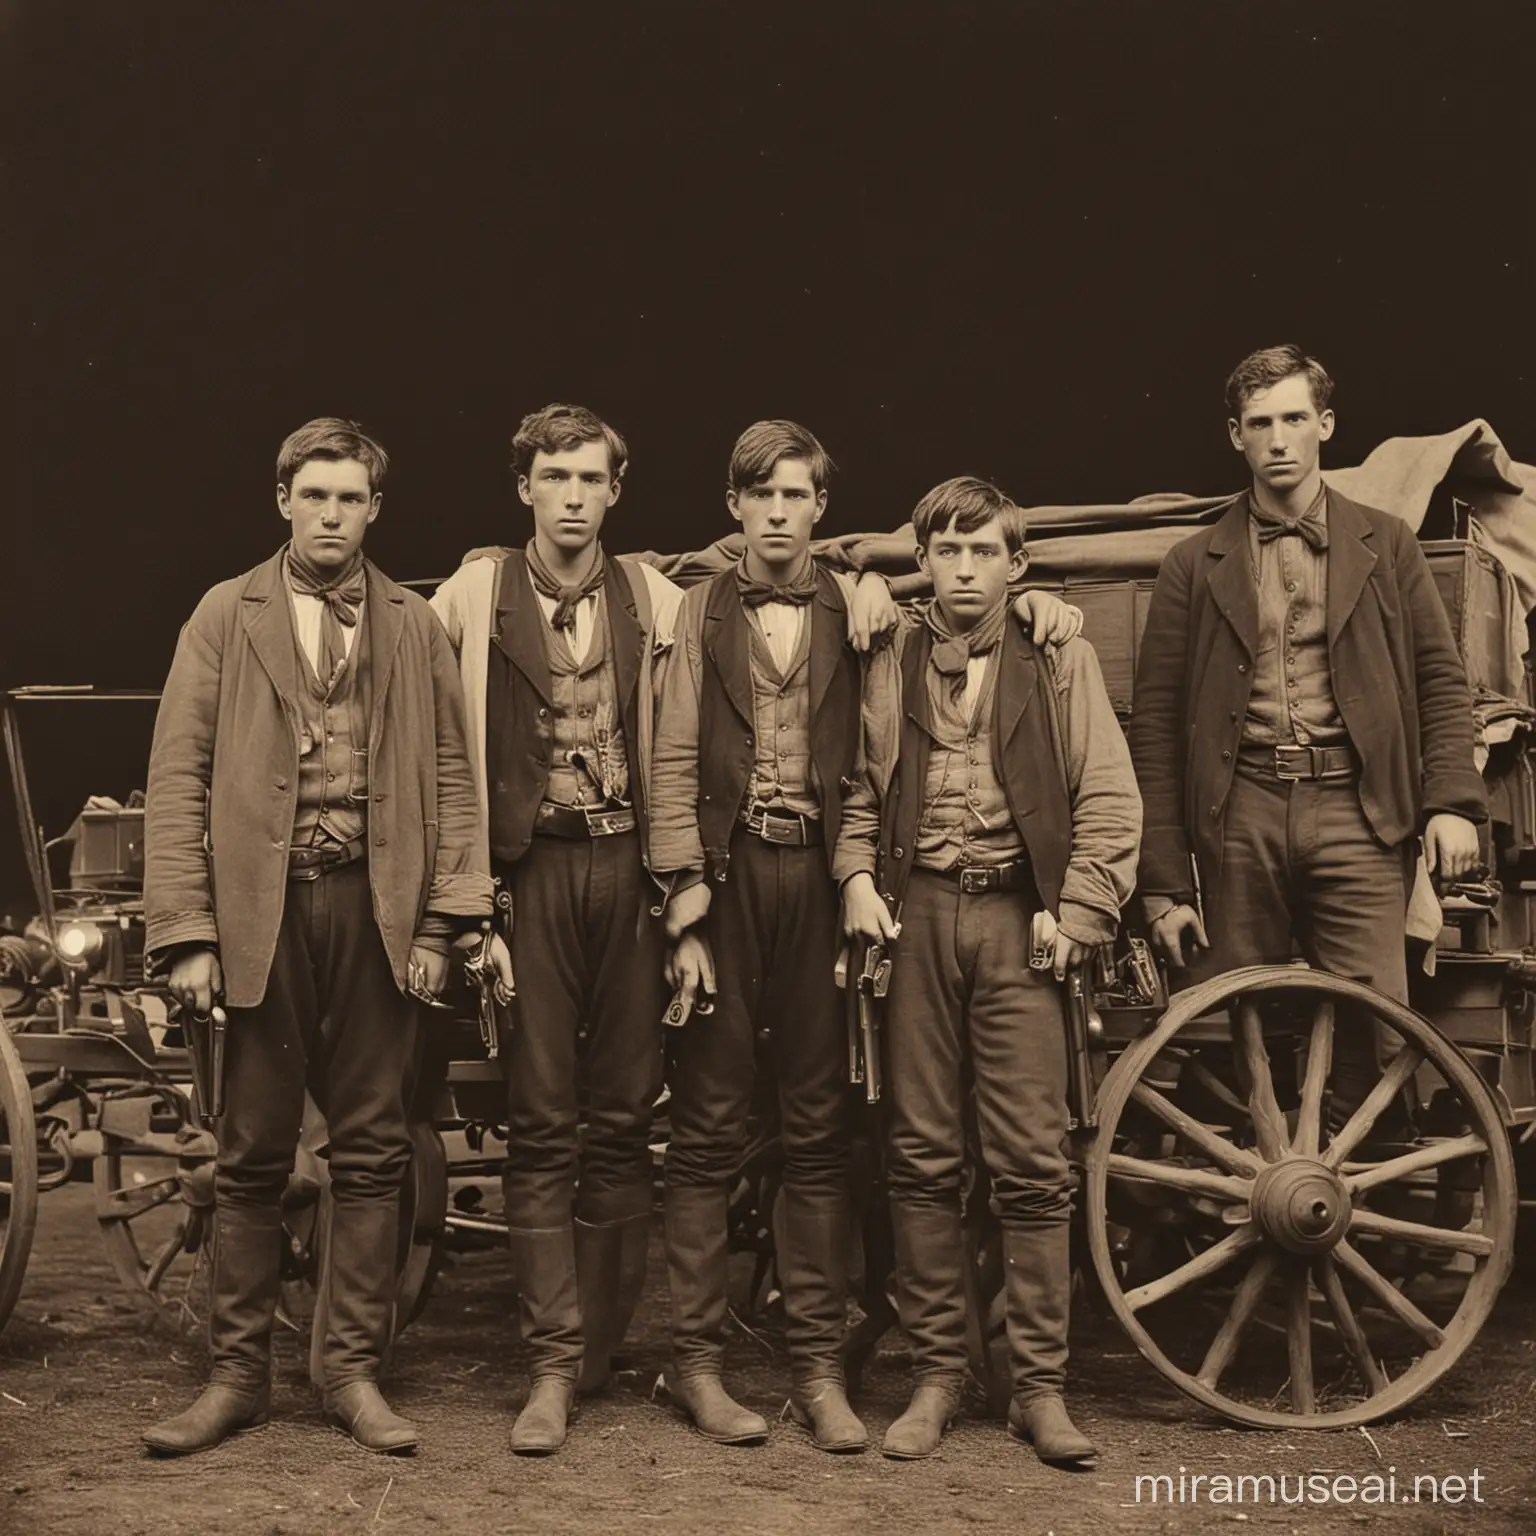 Five Brothers with Guns by a Wagon in the Night 1800s